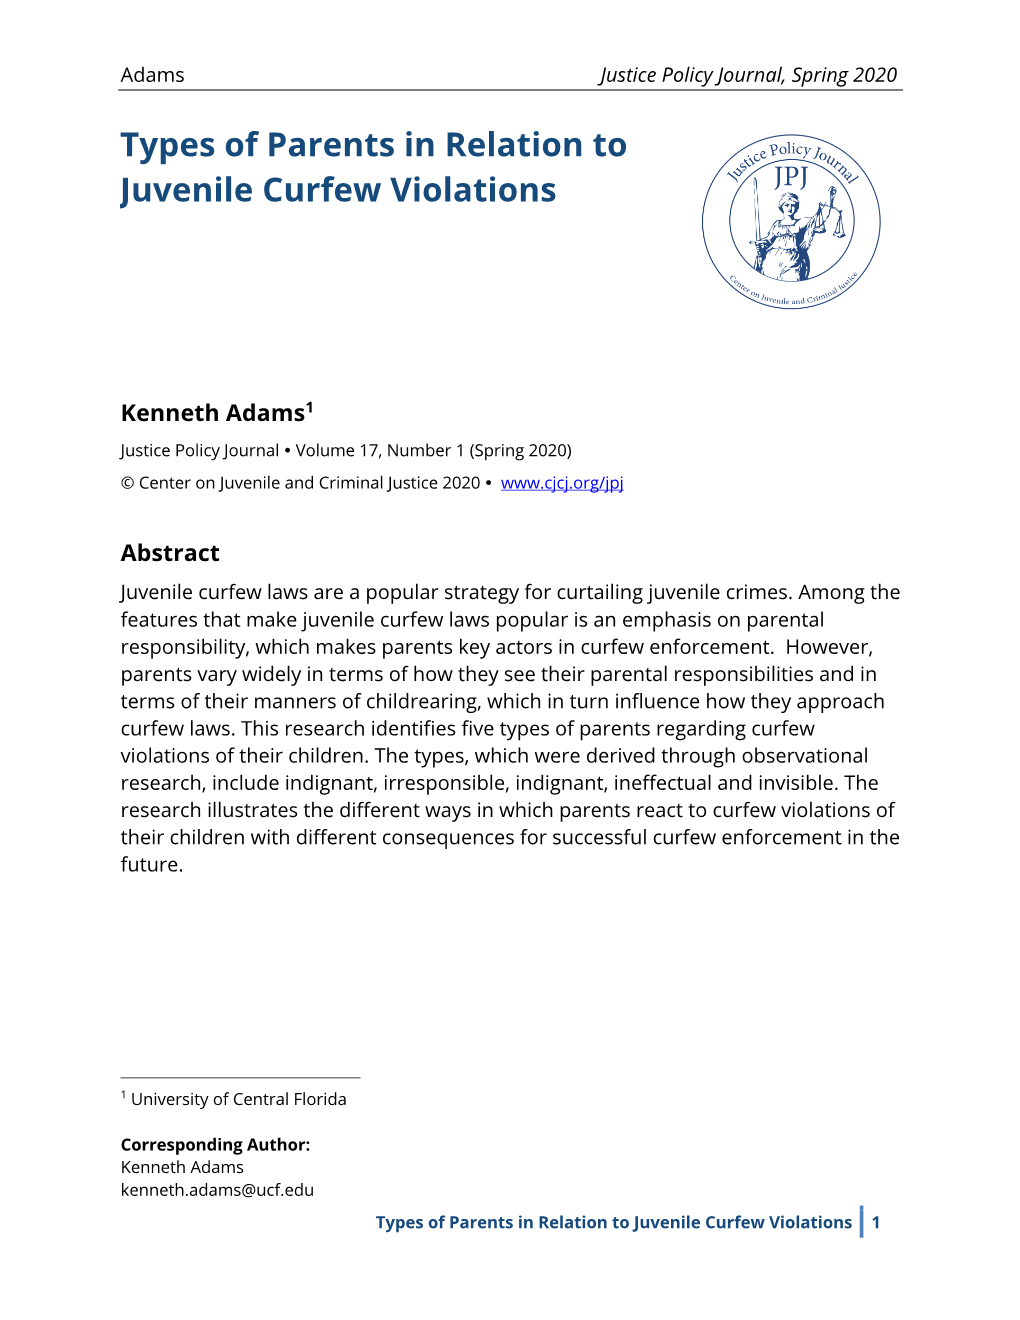 Types of Parents in Relation to Juvenile Curfew Violations